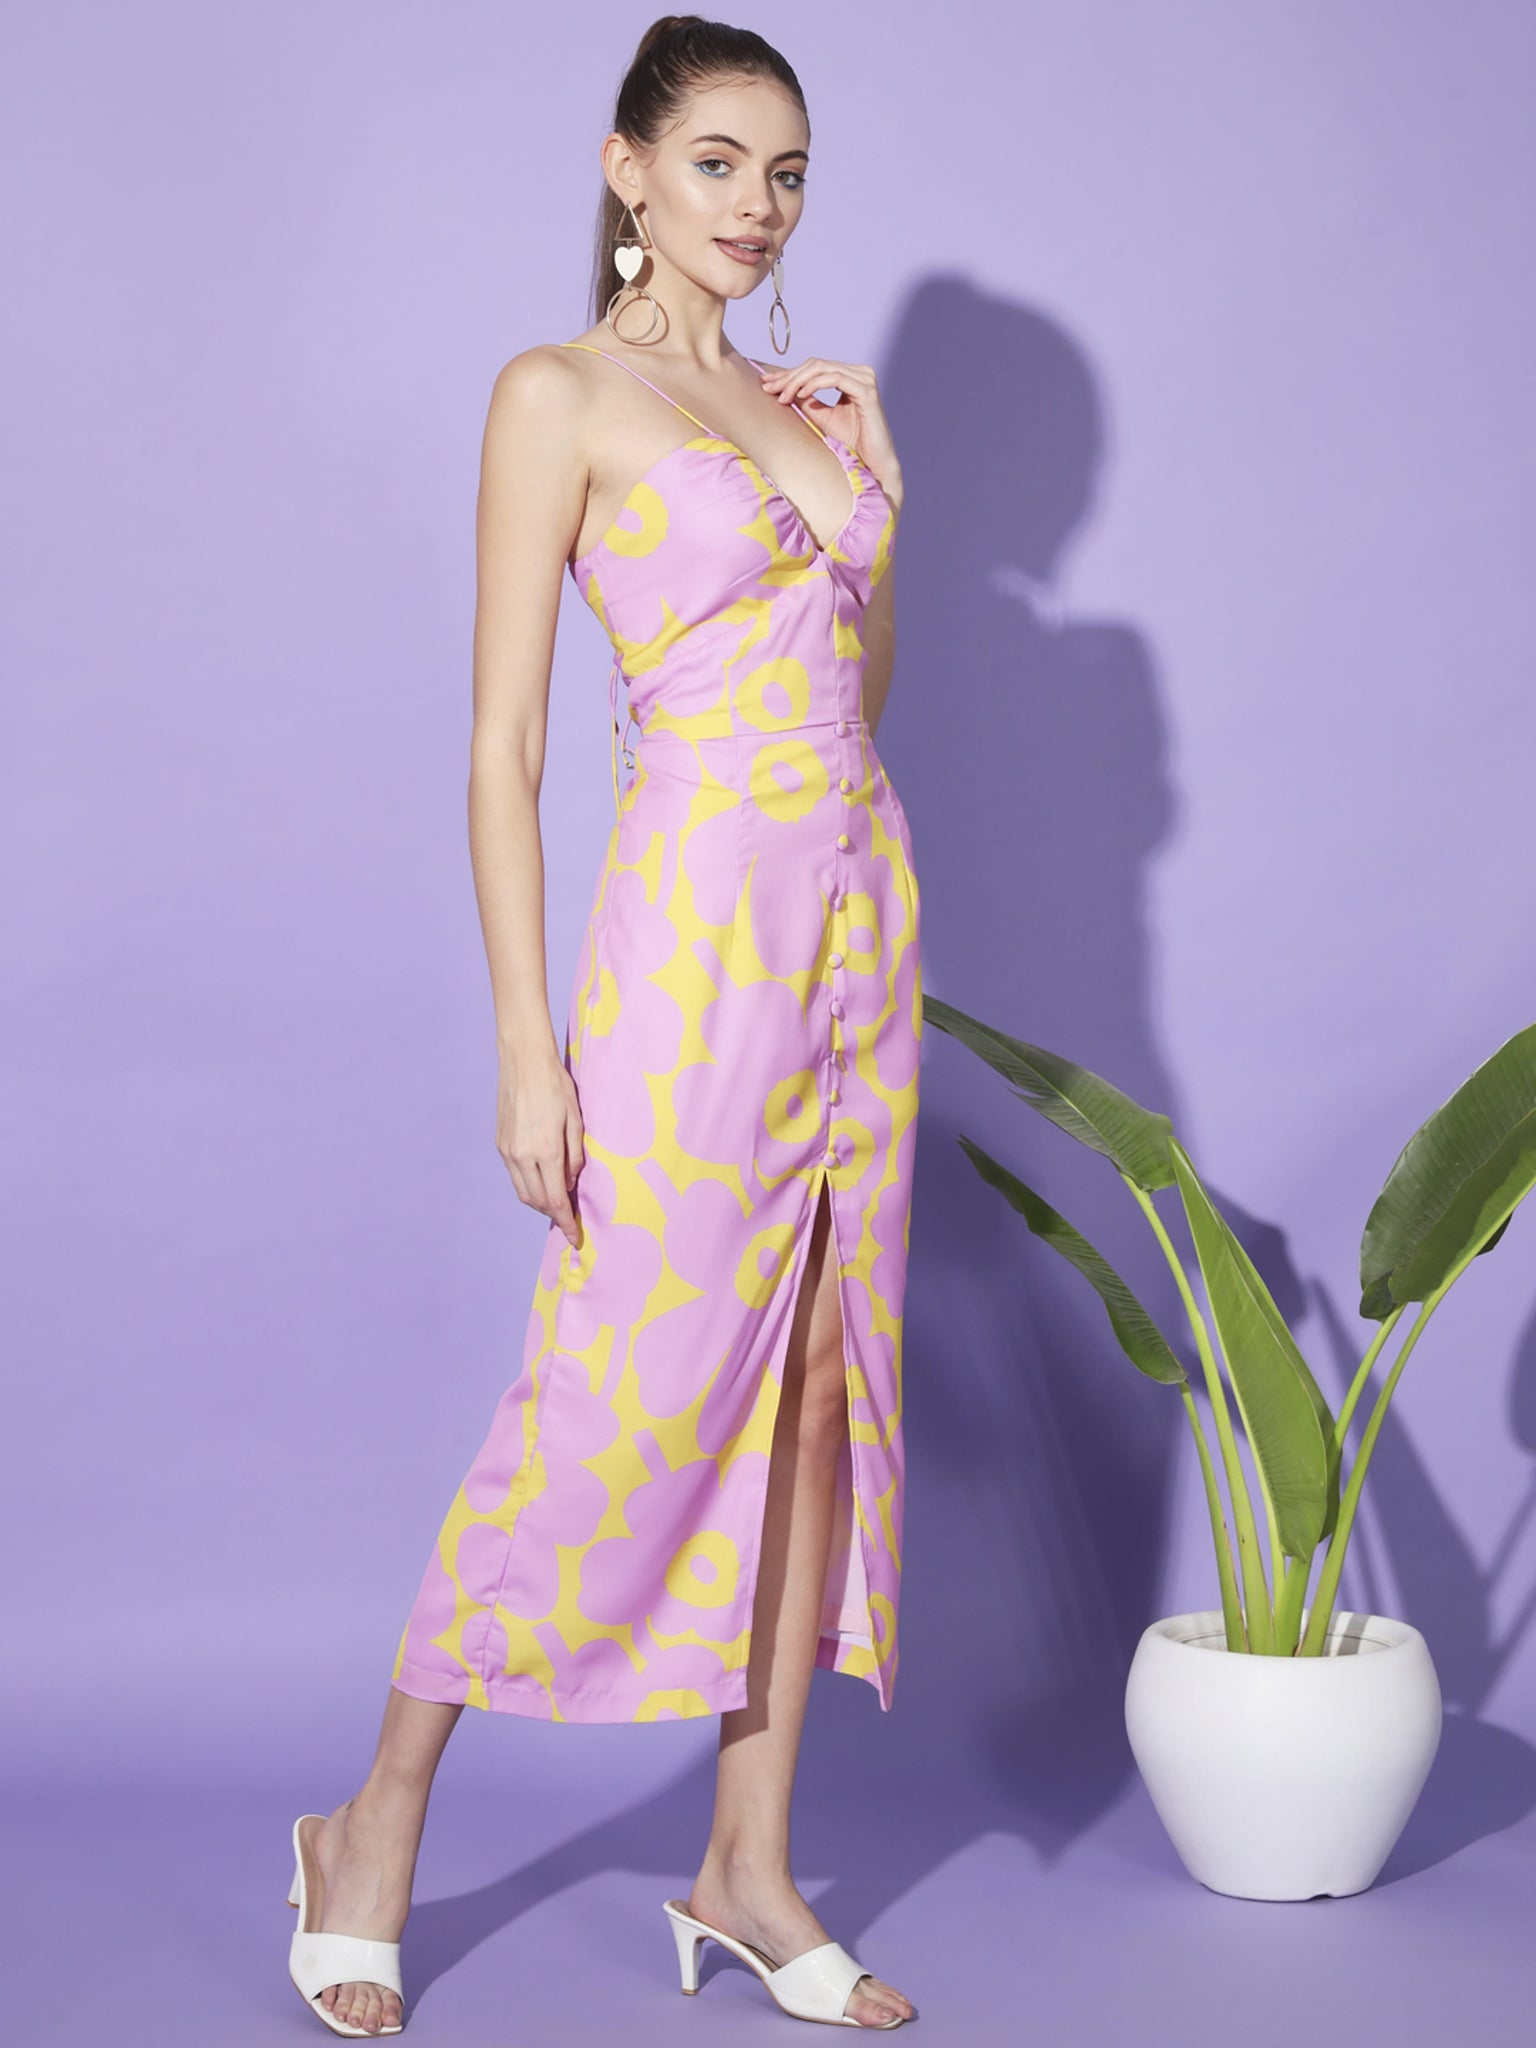 Sunset Bloom: Pink and Yellow Floral Designer Dress